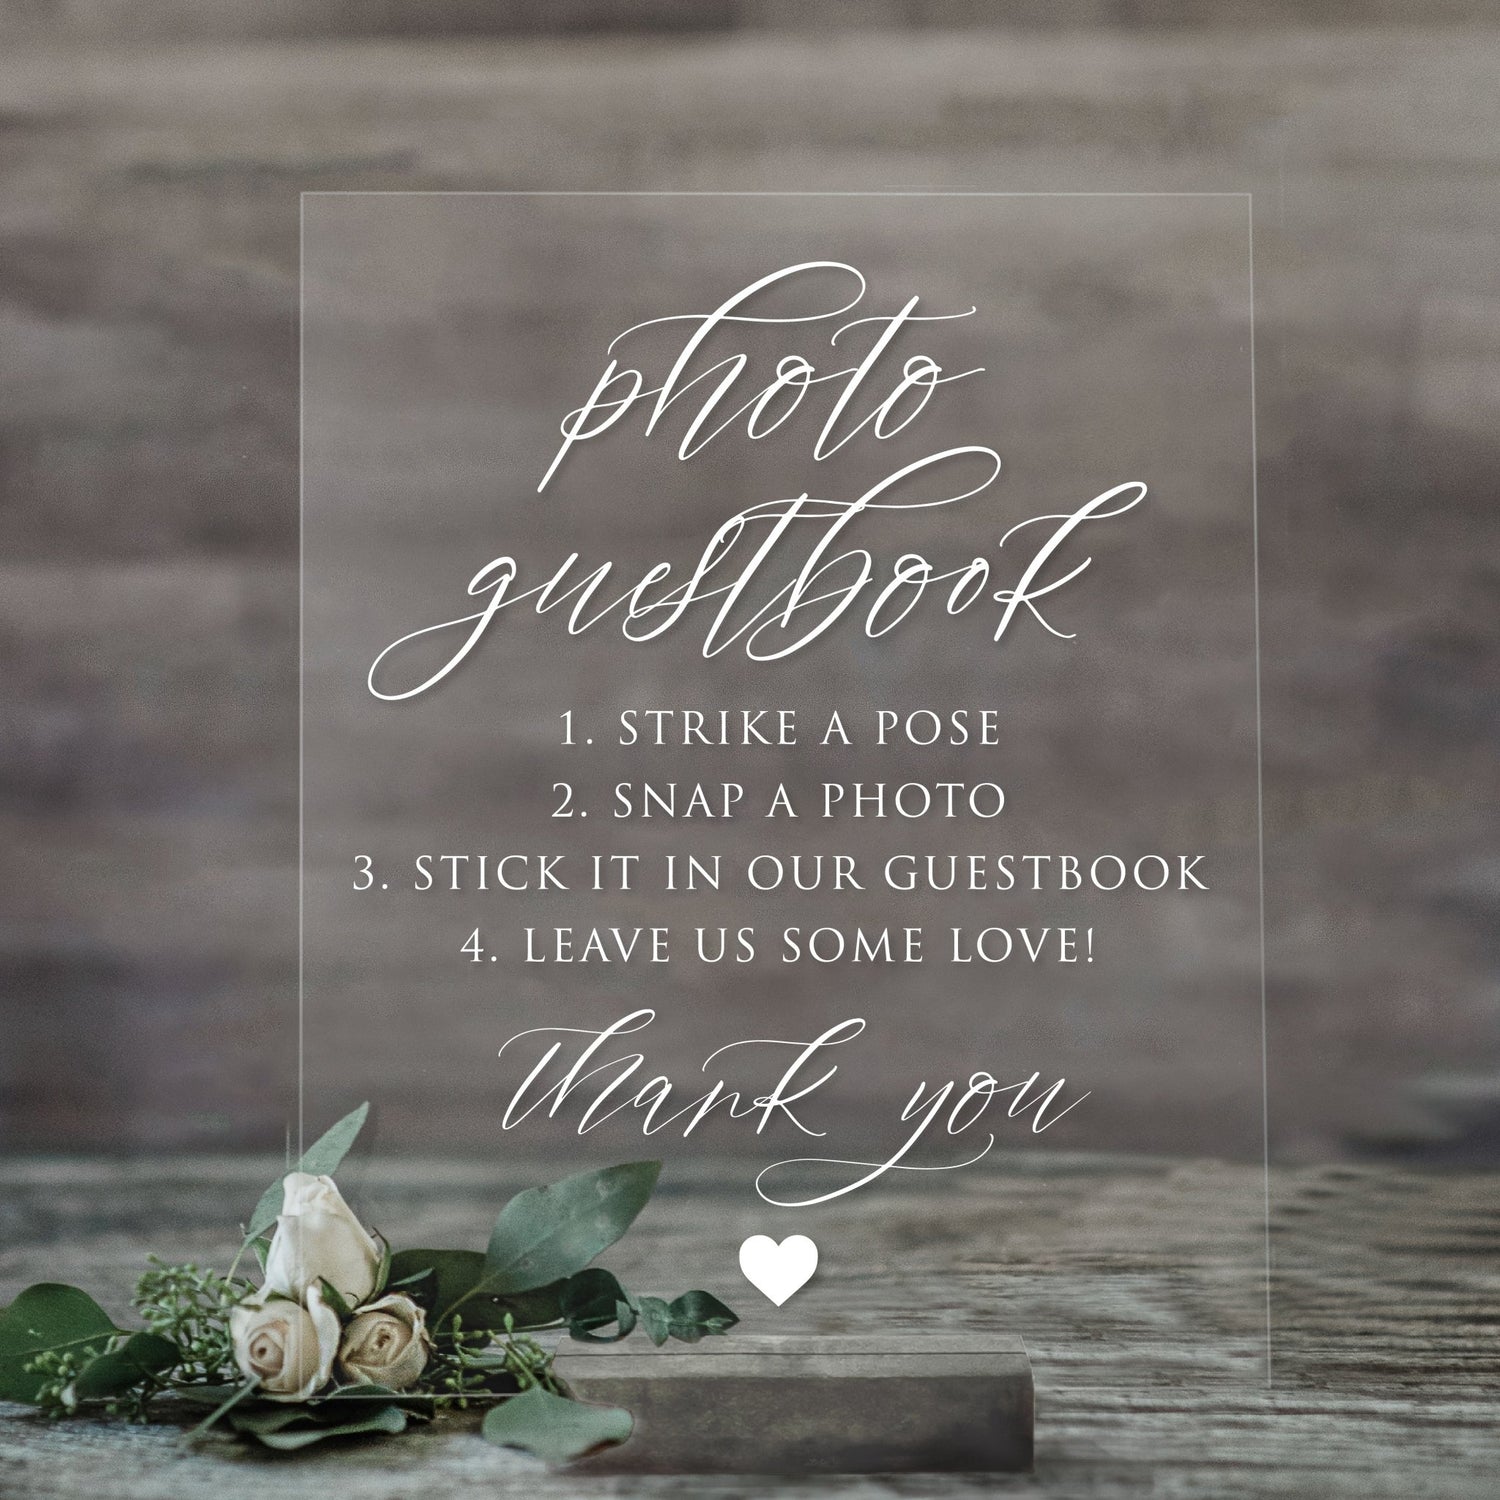 Acrylic Photo Guestbook Sign | Lucite Wedding Decor | SCC-243 - SCC Signs